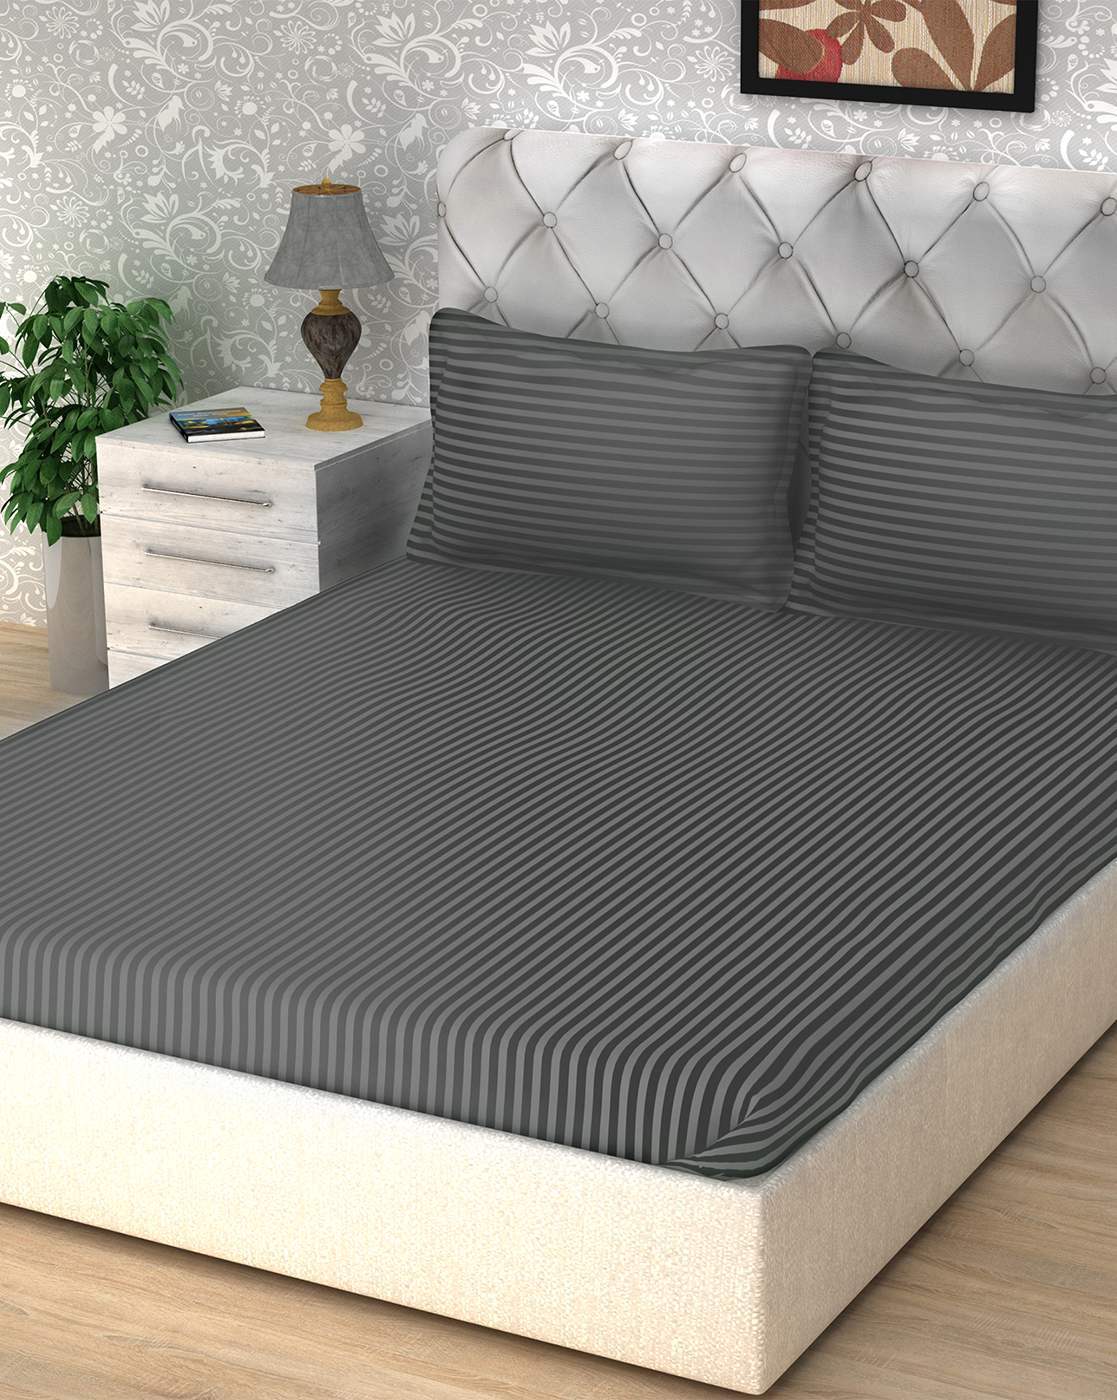 Grey Bedsheets For Home Kitchen, Gray King Size Bed Sheets